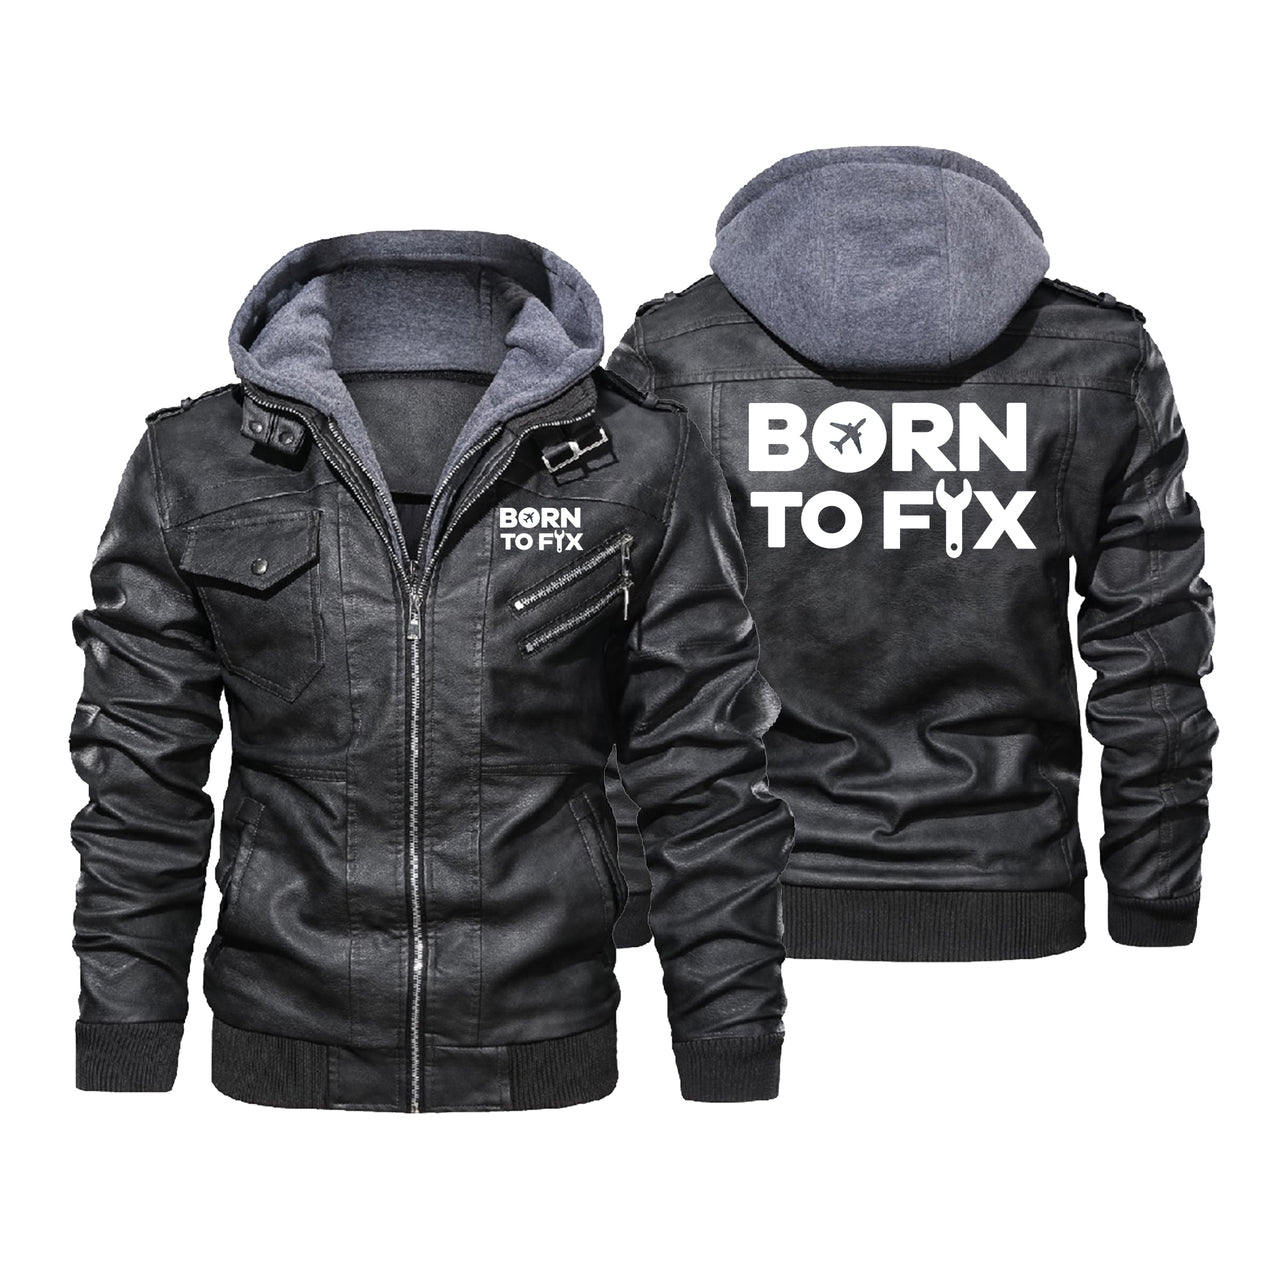 Born To Fix Airplanes Designed Hooded Leather Jackets